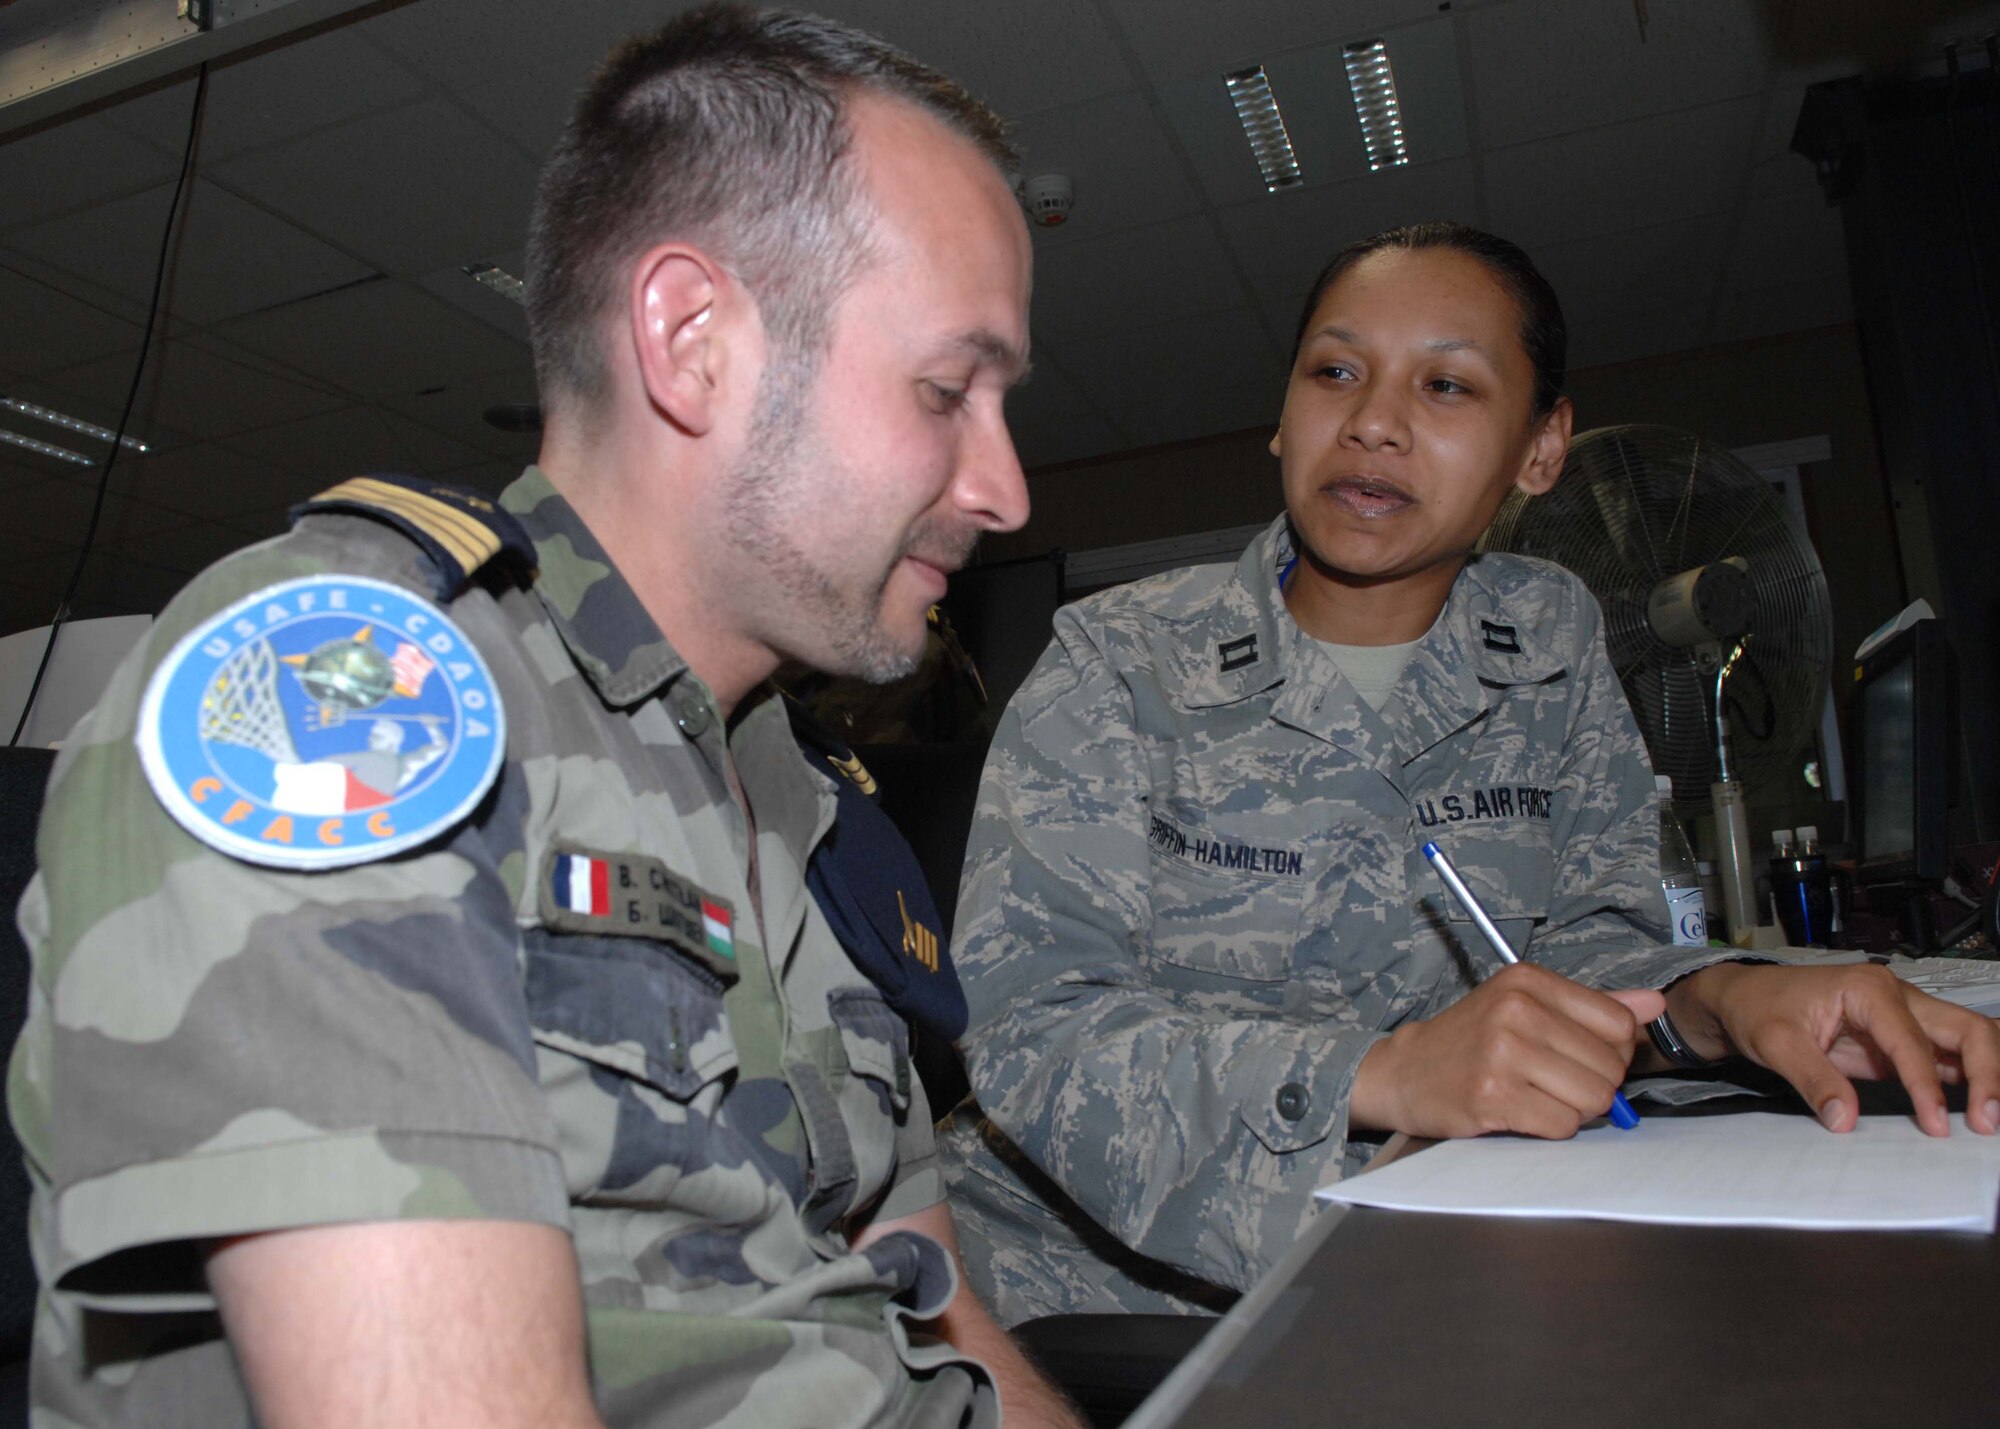 Einsiedlerhof Air Station, Germany--Capt. Montana Griffin-Hamilton discusses scenarios with French Air Force Capt. Brice Chatelain during the U.S. European Command's premier exercise. The exercise brought together U.S., French, and Polish forces as part of a combined task force.  (U.S. Air Force photo by Senior Airman Kirsten Sisson)